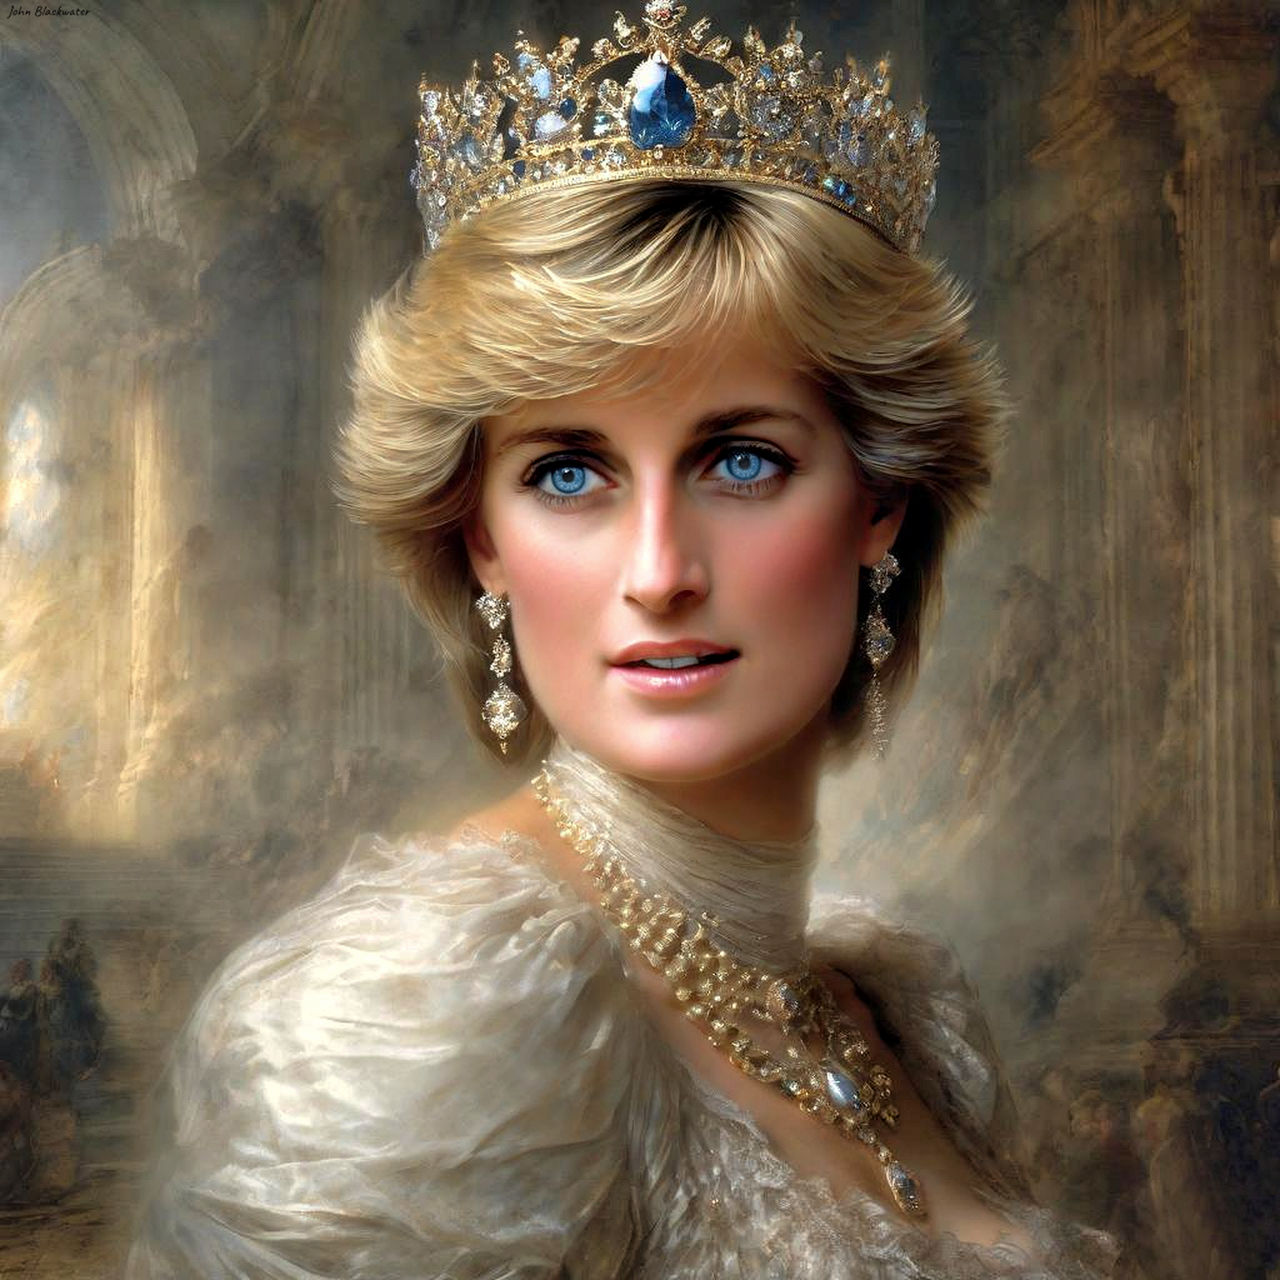 Princess Diana, Queen of hearts by johnblackwater on DeviantArt